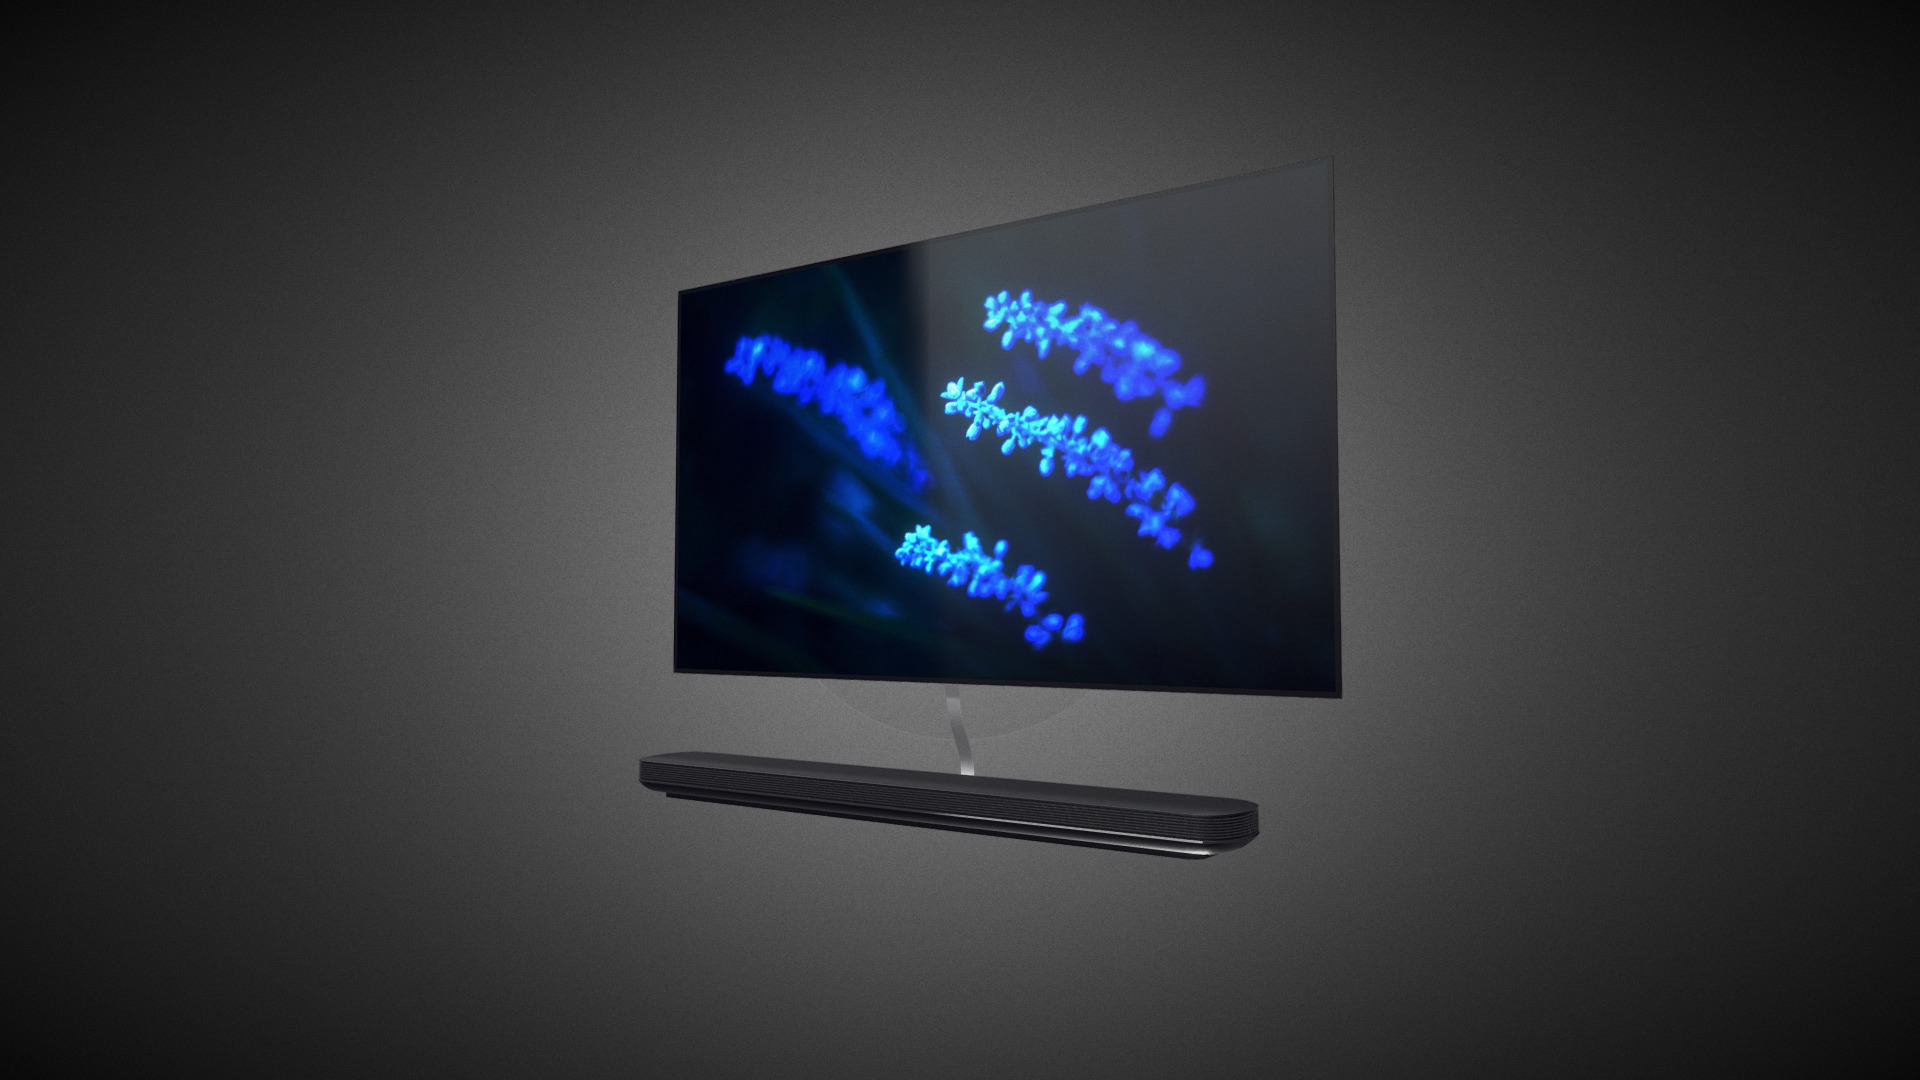 3D model LG Signature OLED TV W for Element 3D - This is a 3D model of the LG Signature OLED TV W for Element 3D. The 3D model is about a computer monitor with a keyboard.